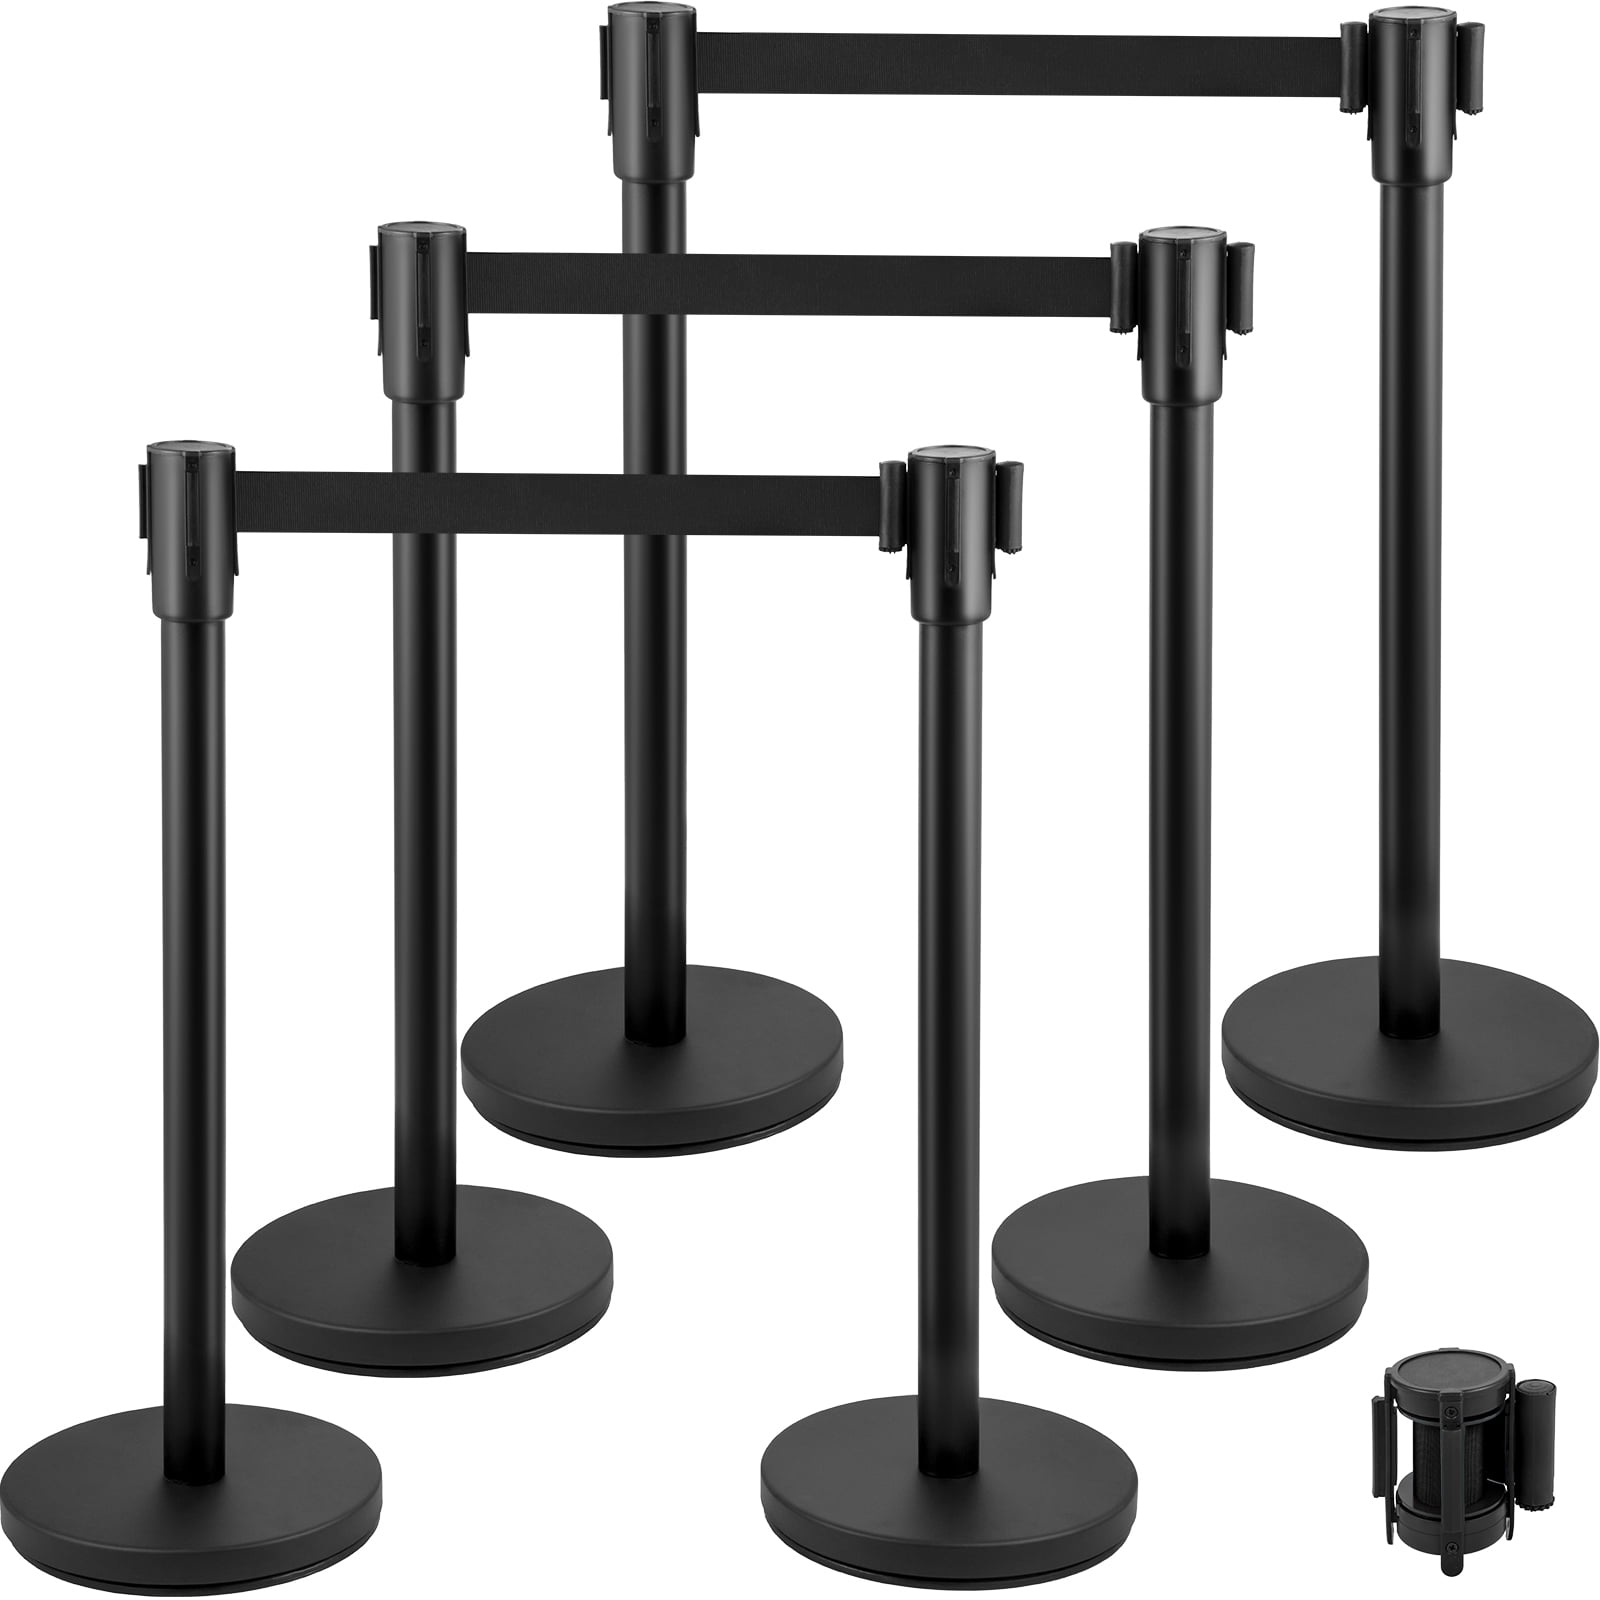 8 Pack of Retractable Crowd Control Barrier Posts Stanchions 6'6" Strap 